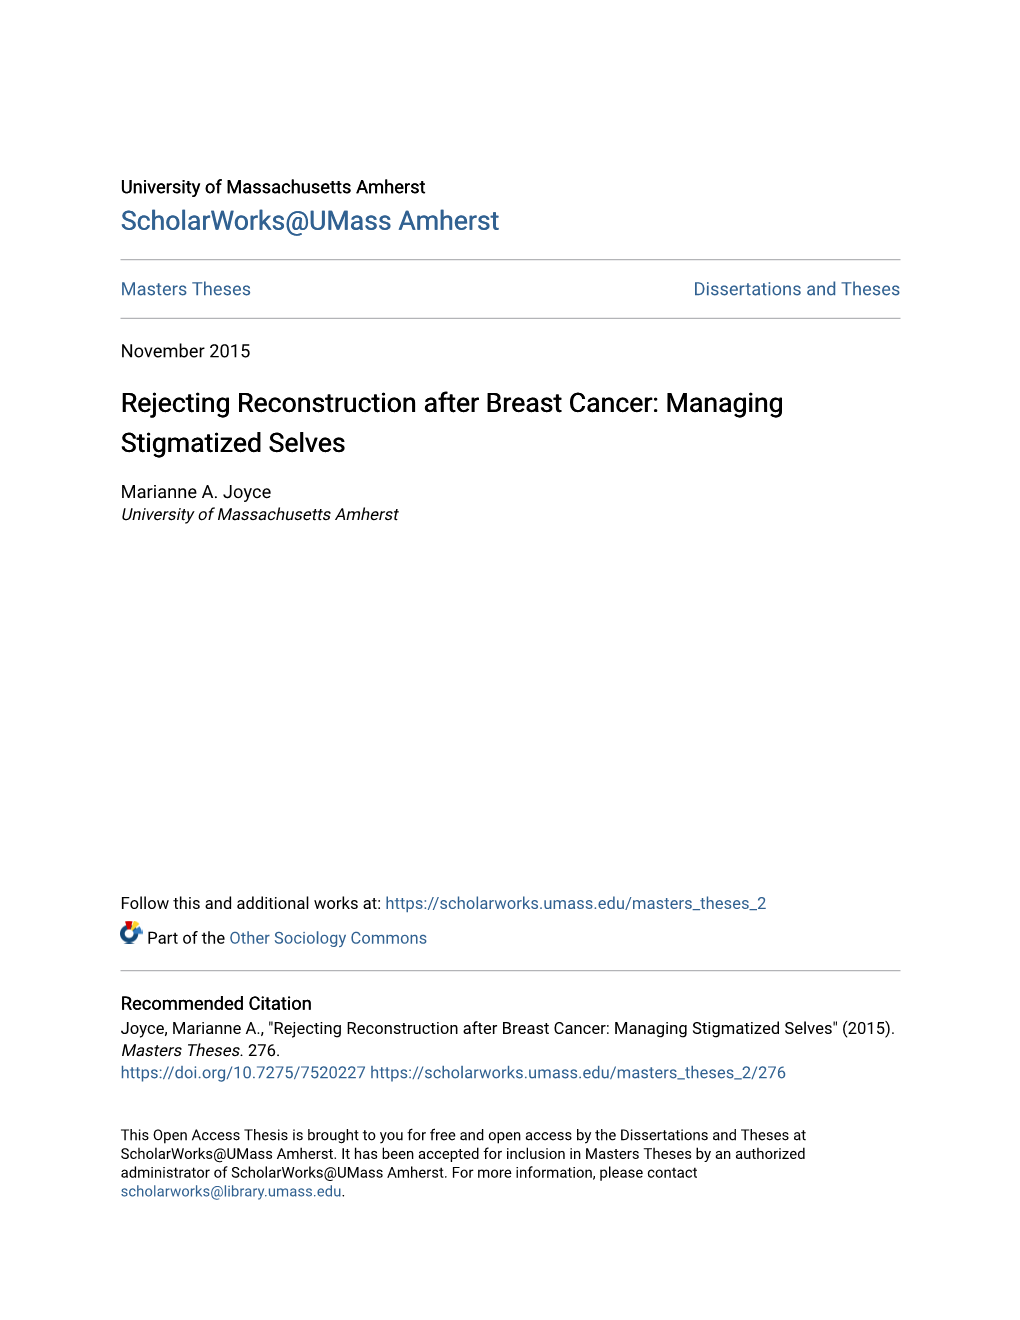 Rejecting Reconstruction After Breast Cancer: Managing Stigmatized Selves